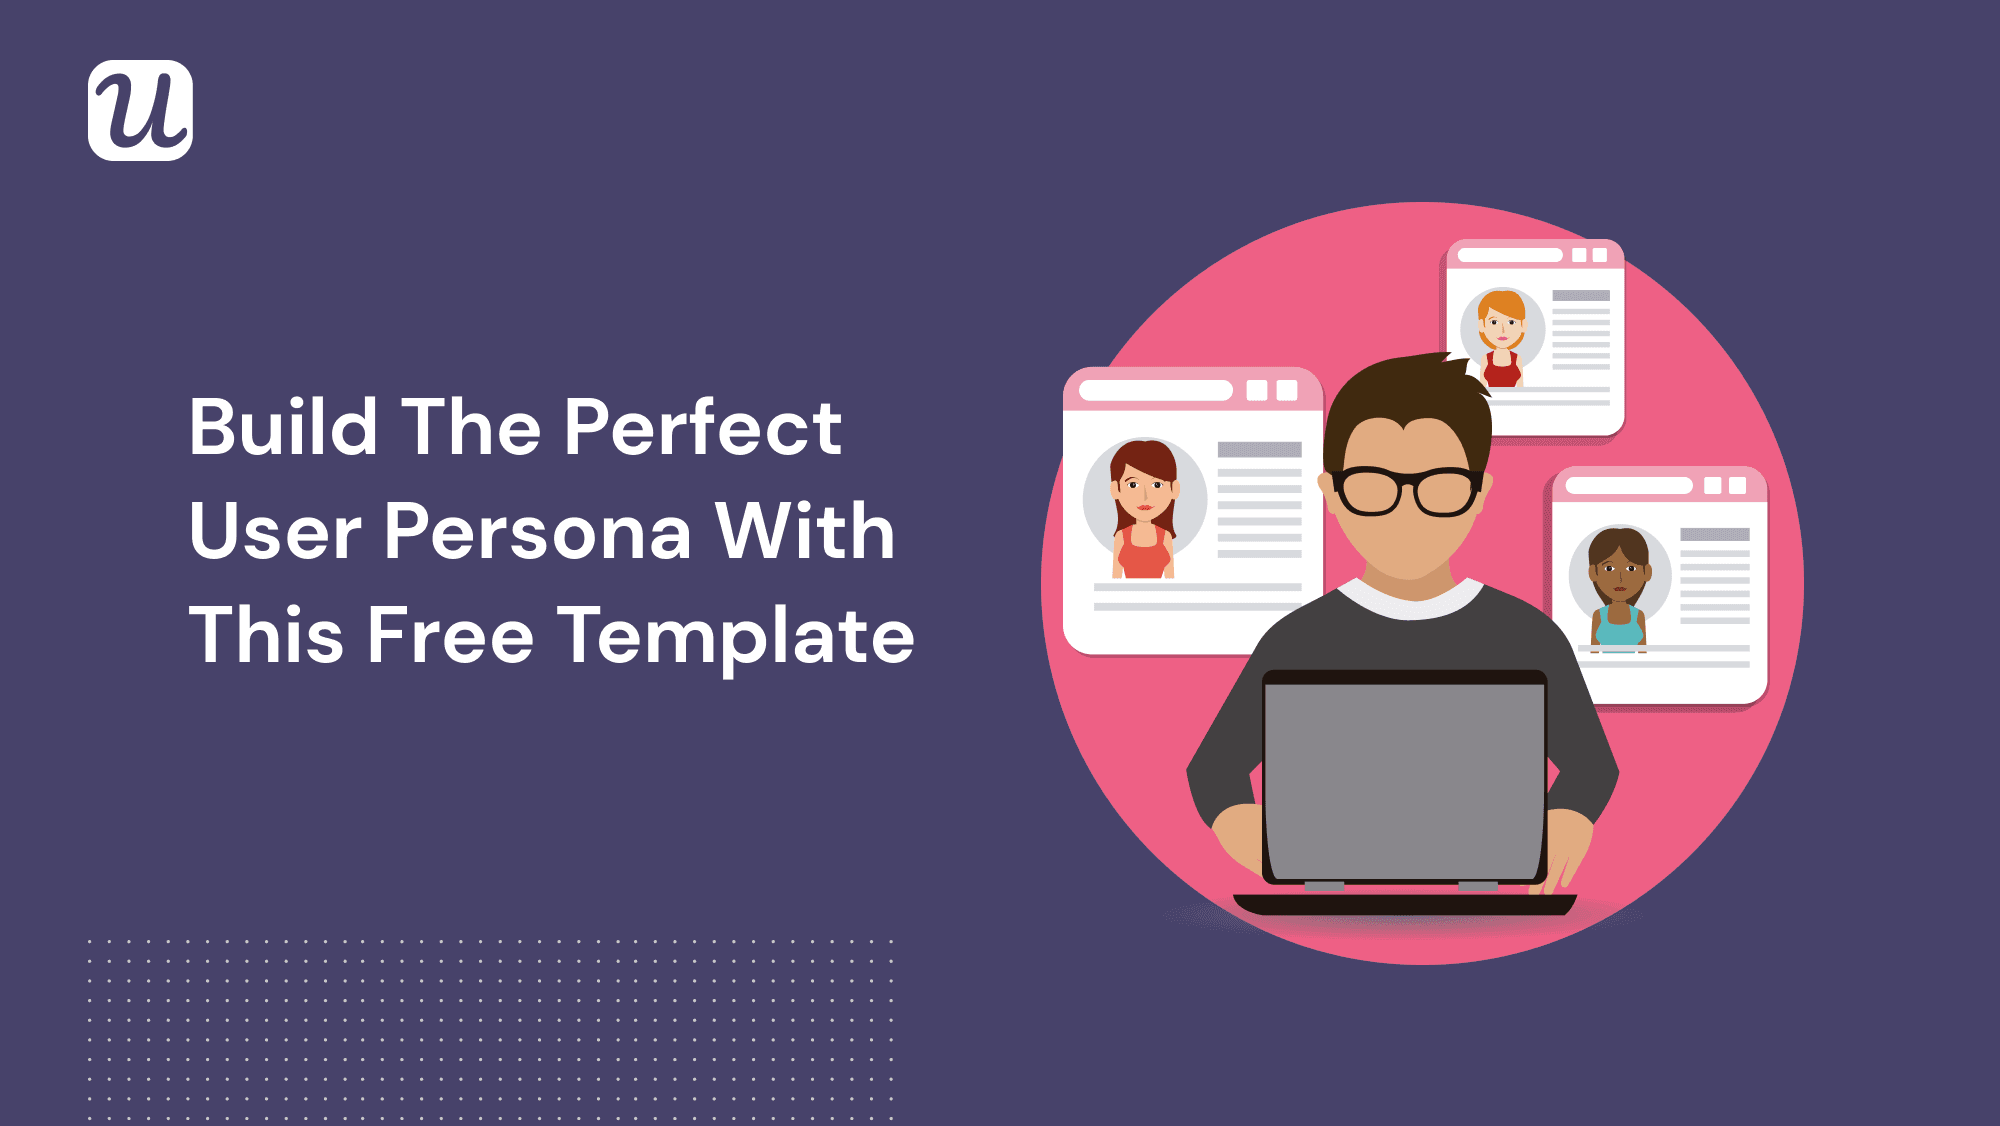 Free User Persona Template for SaaS - The Fastest Way to Create